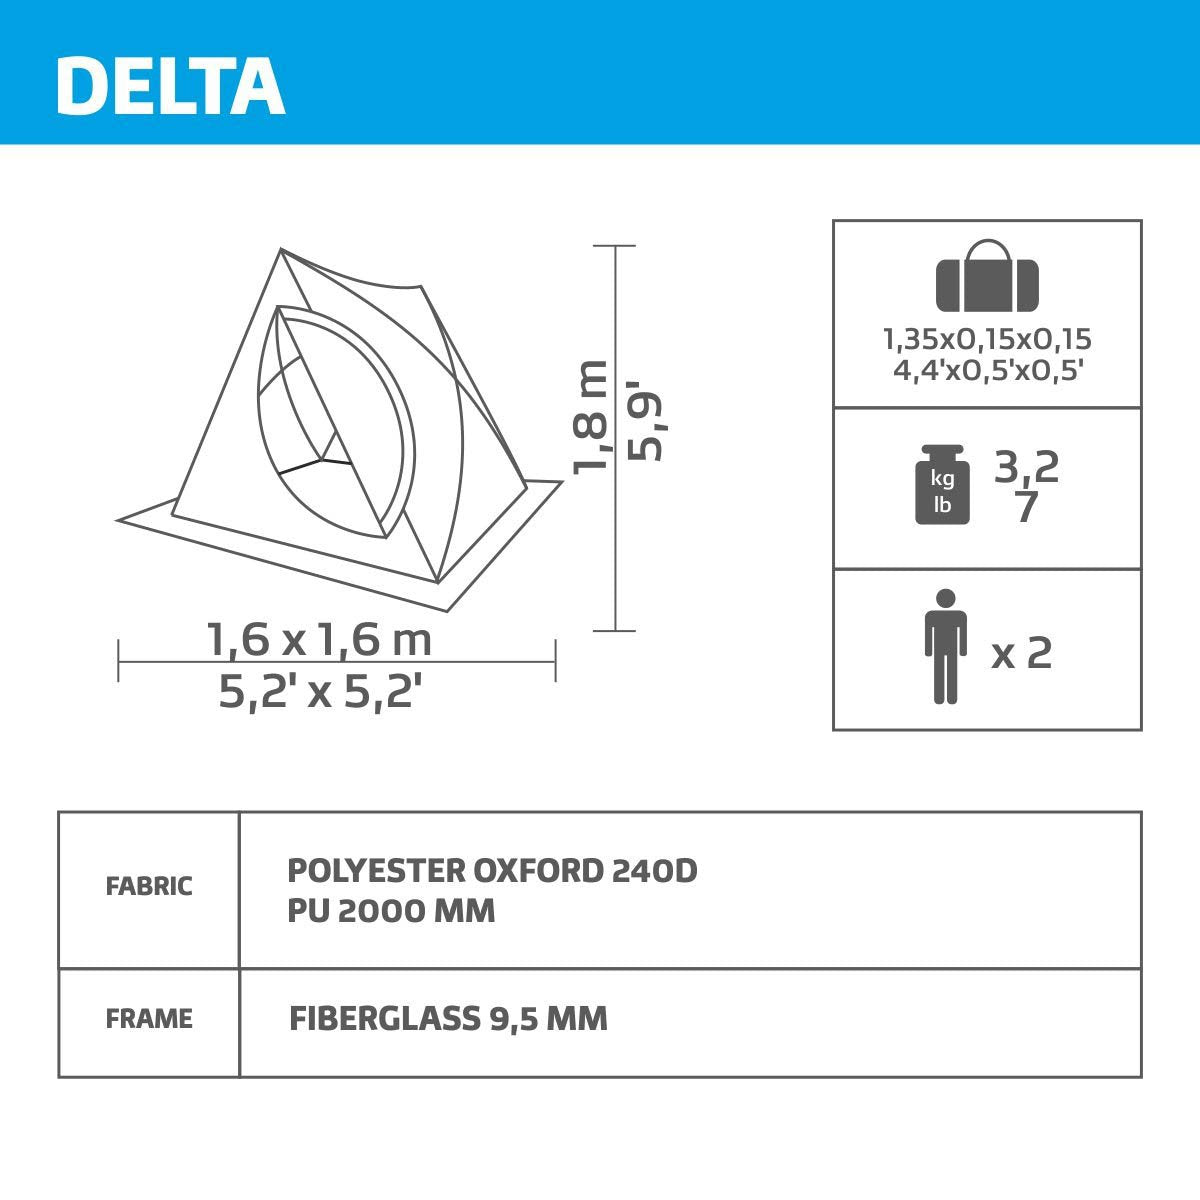 Delta Portable Ice Fishing Tent Shelter for 2 Persons is made of polyester oxford 240 d PU 2000 mm. The frame is made of 9.5 mm fiberglass. Weighs 7 lbs, carrying bag attached